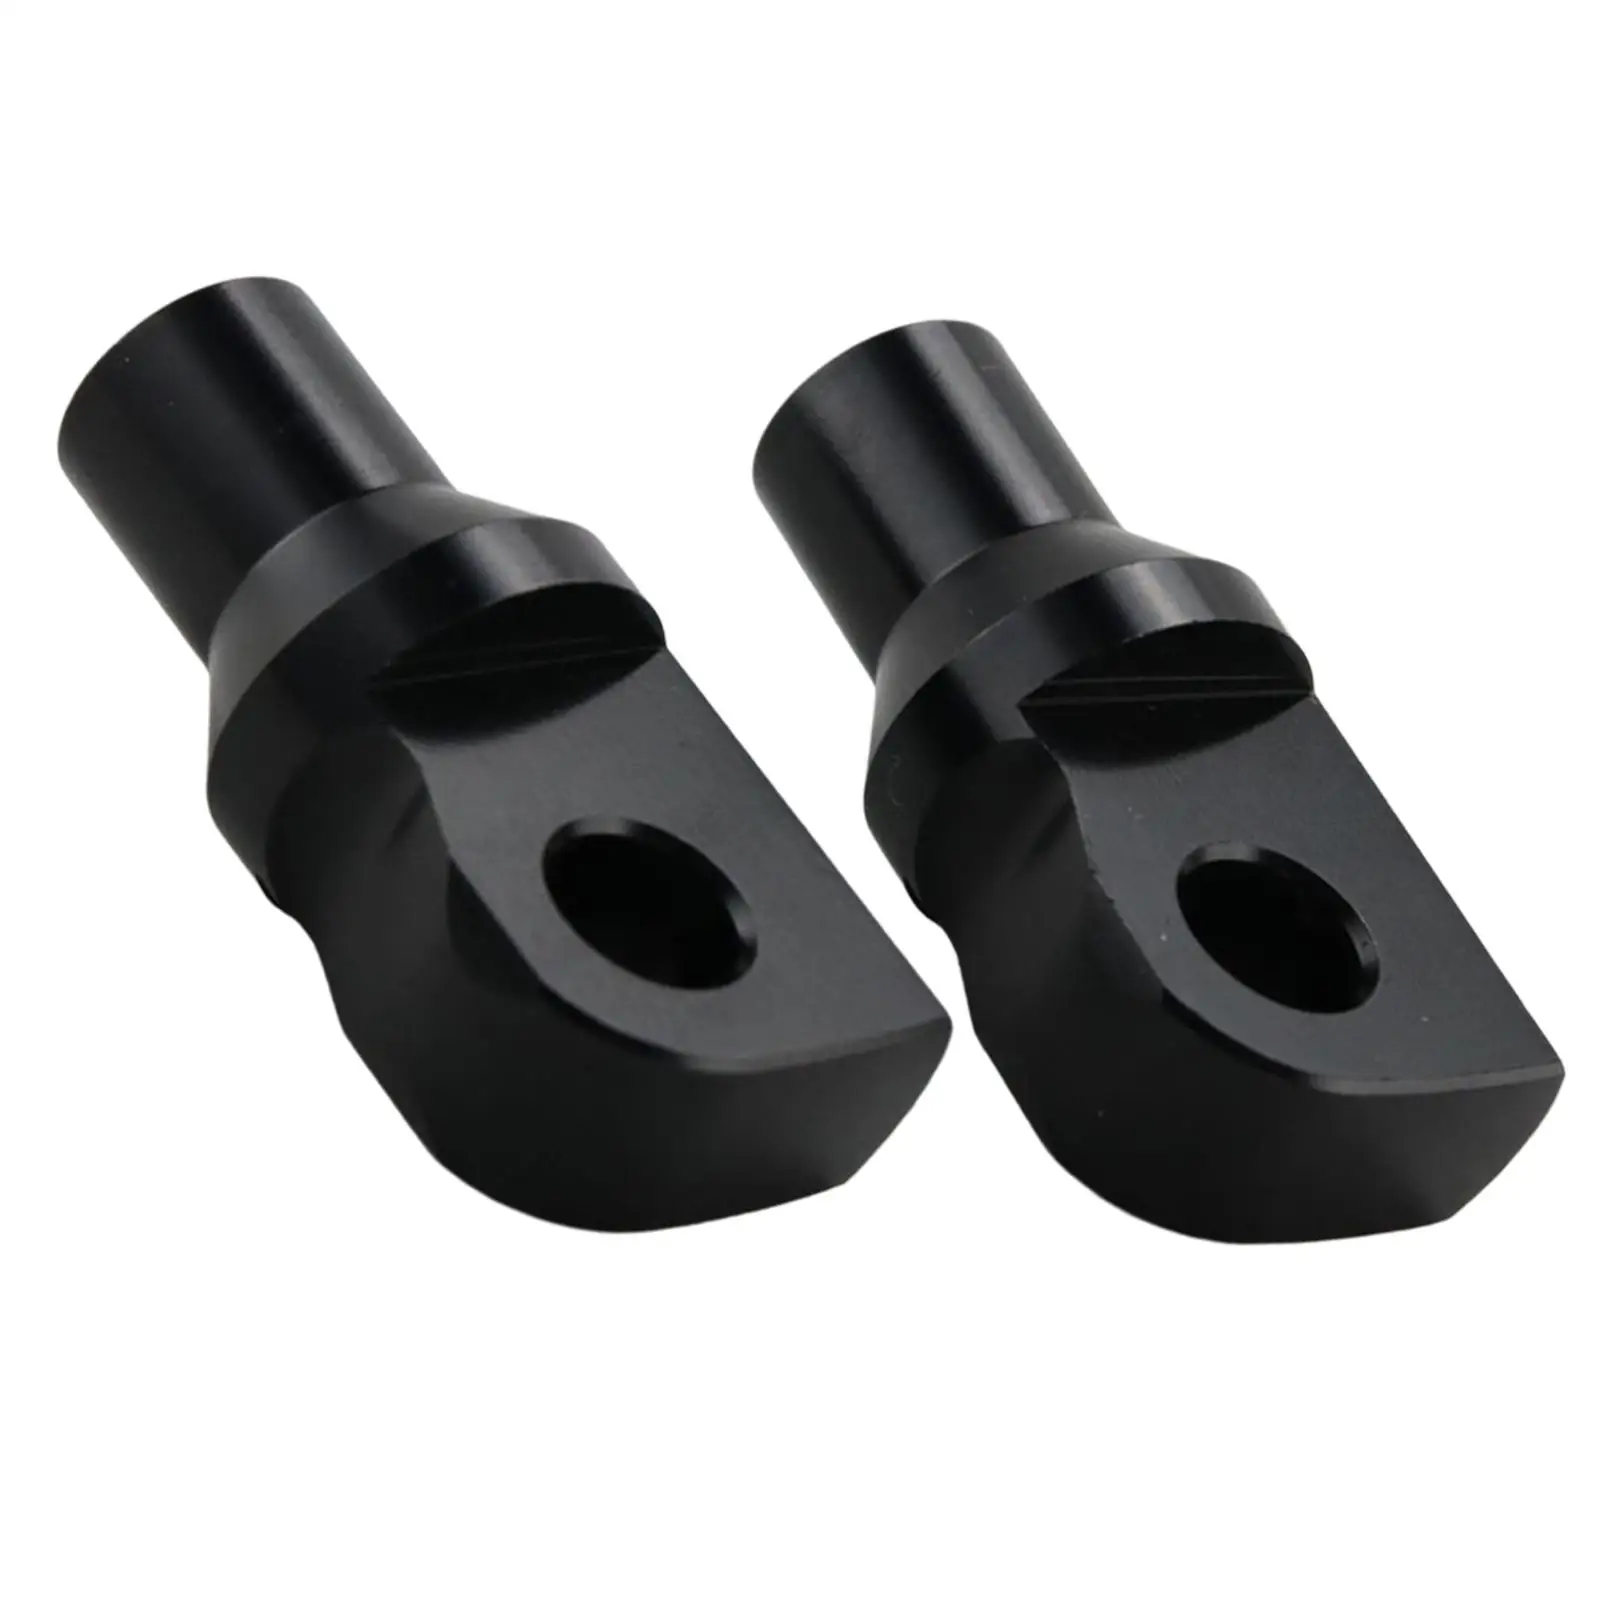 2x Motorcycle Footpeg Mount Bolt Adapter for Superlow Heritage Fxdwg Male Pegs Mounting